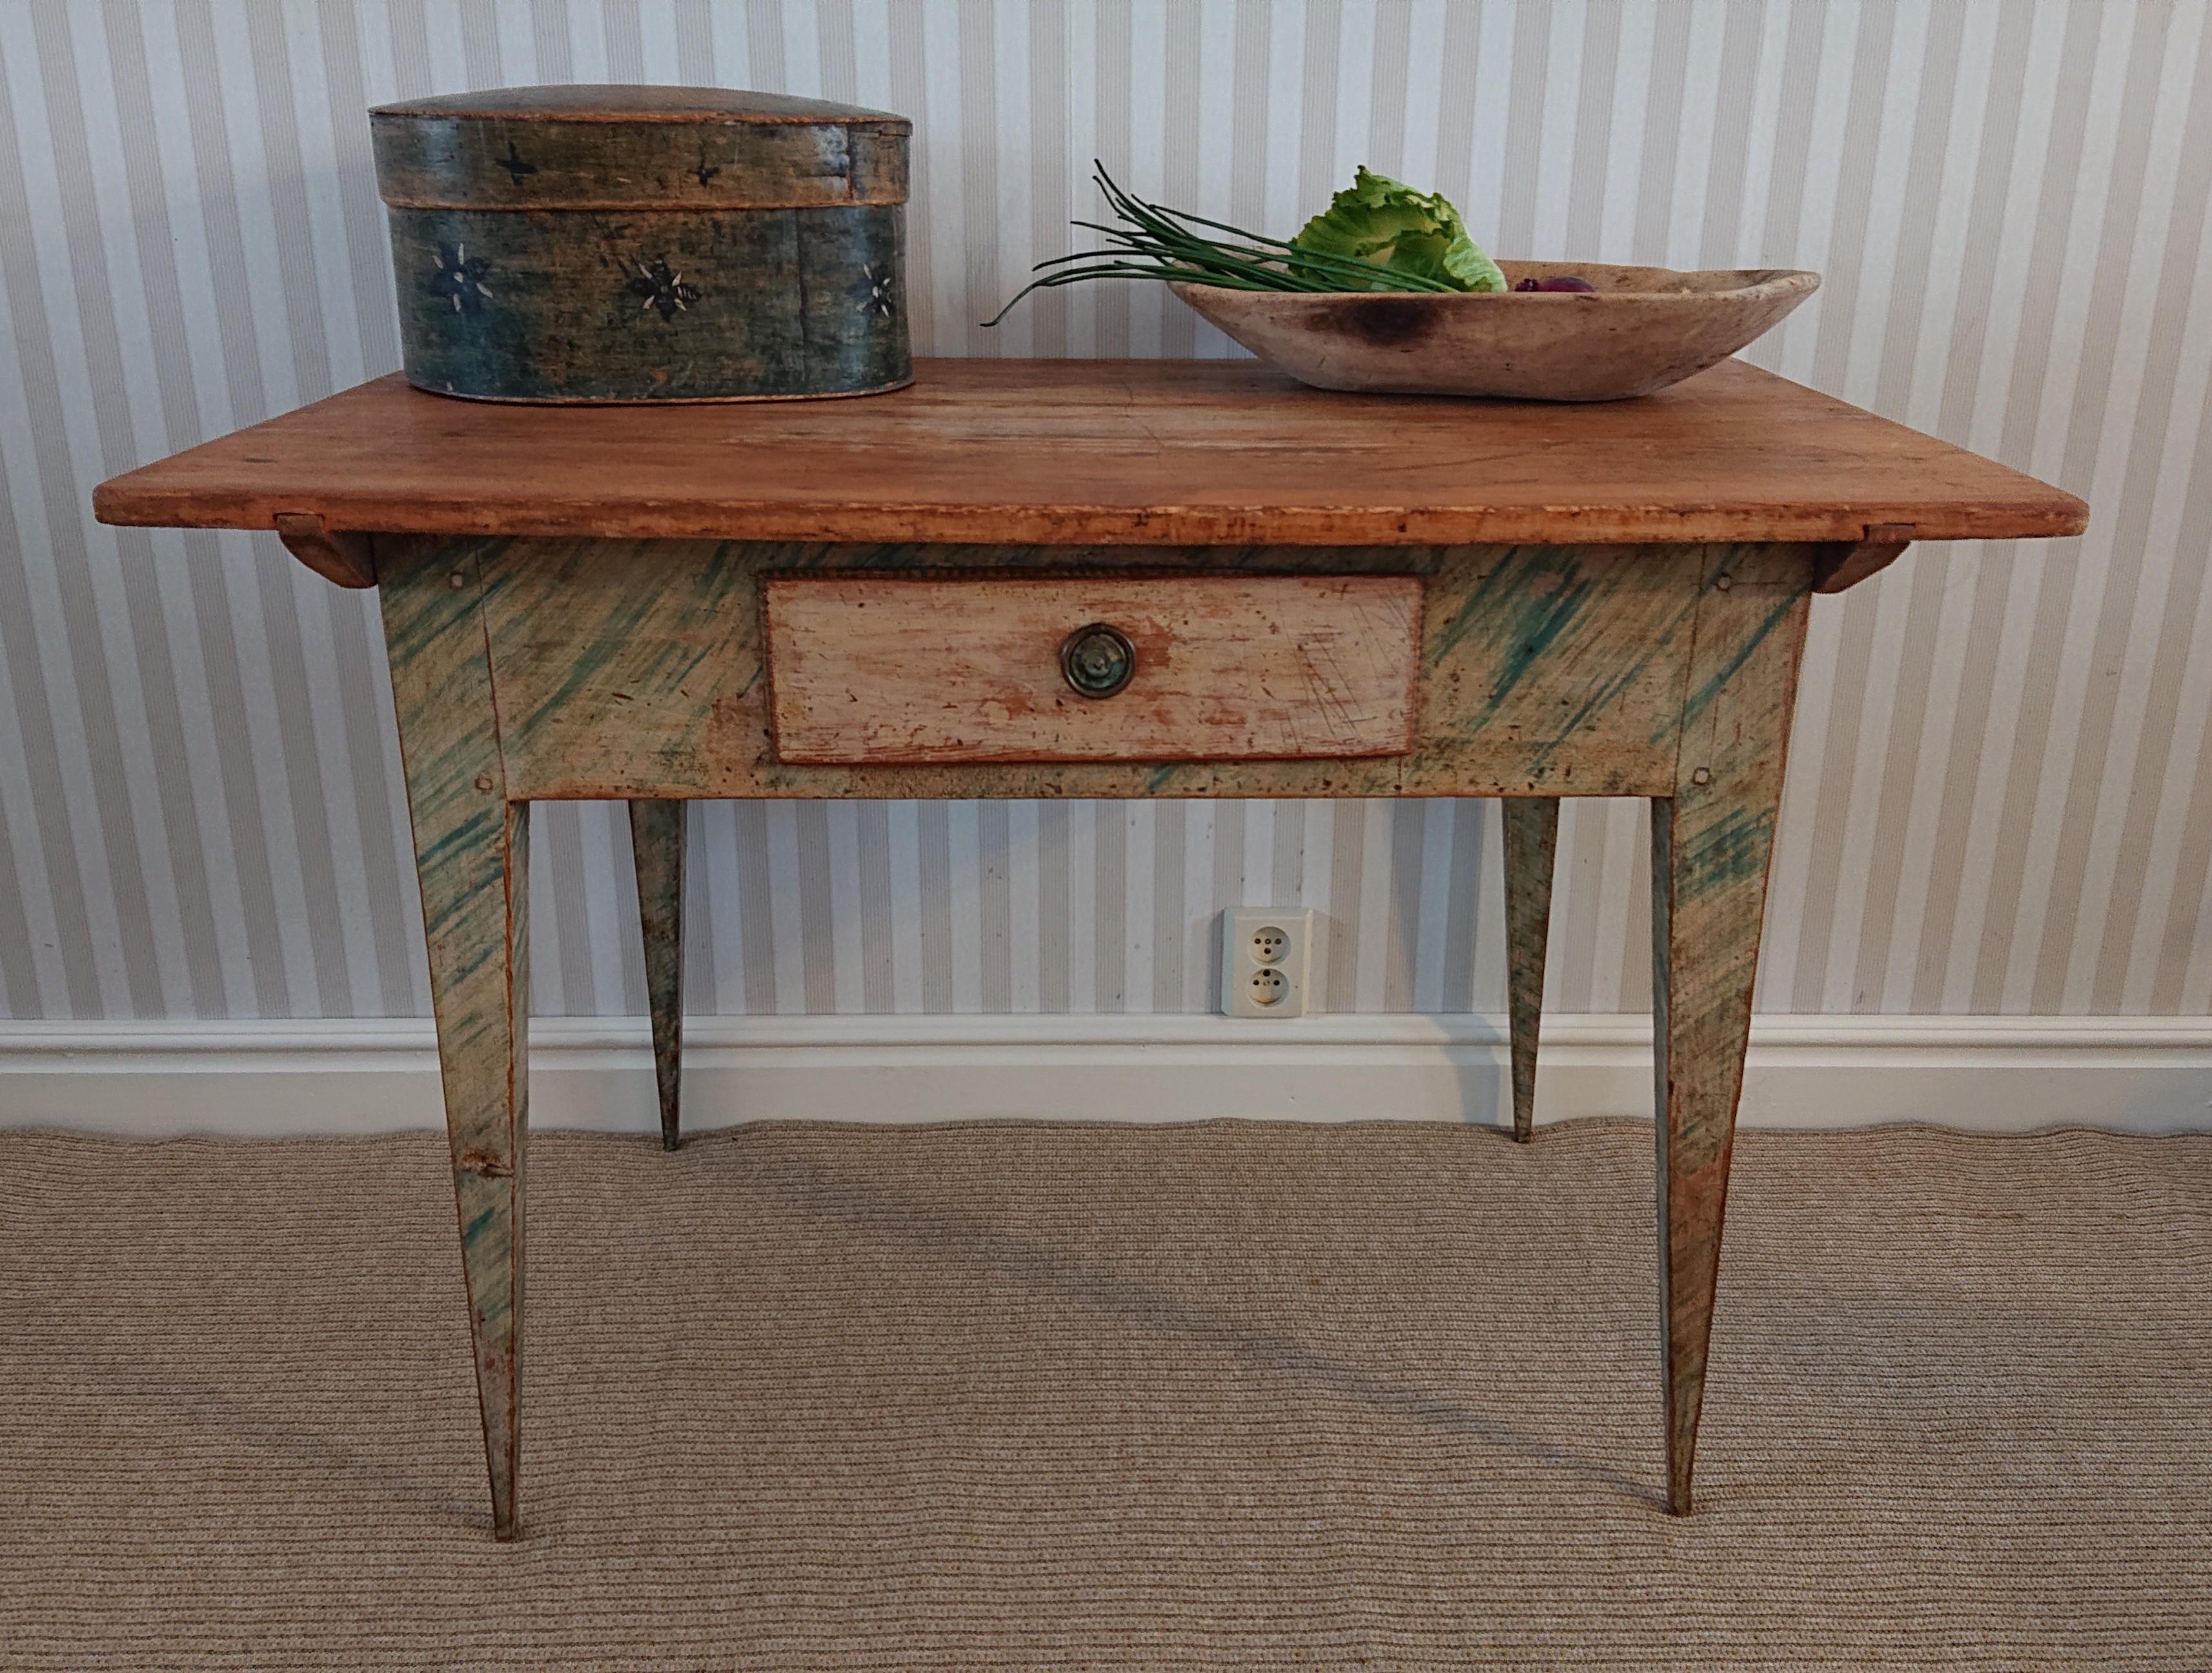 19th century Swedish Gustavian desk from Sundsvall Medelpad, Northern Sweden.
A stunning desk with fantastic patina.
Scraped and washed to its well Preserved Originalpaint.
Lovely marble imitations paint
Nicely tapered legs and one drawer.
The